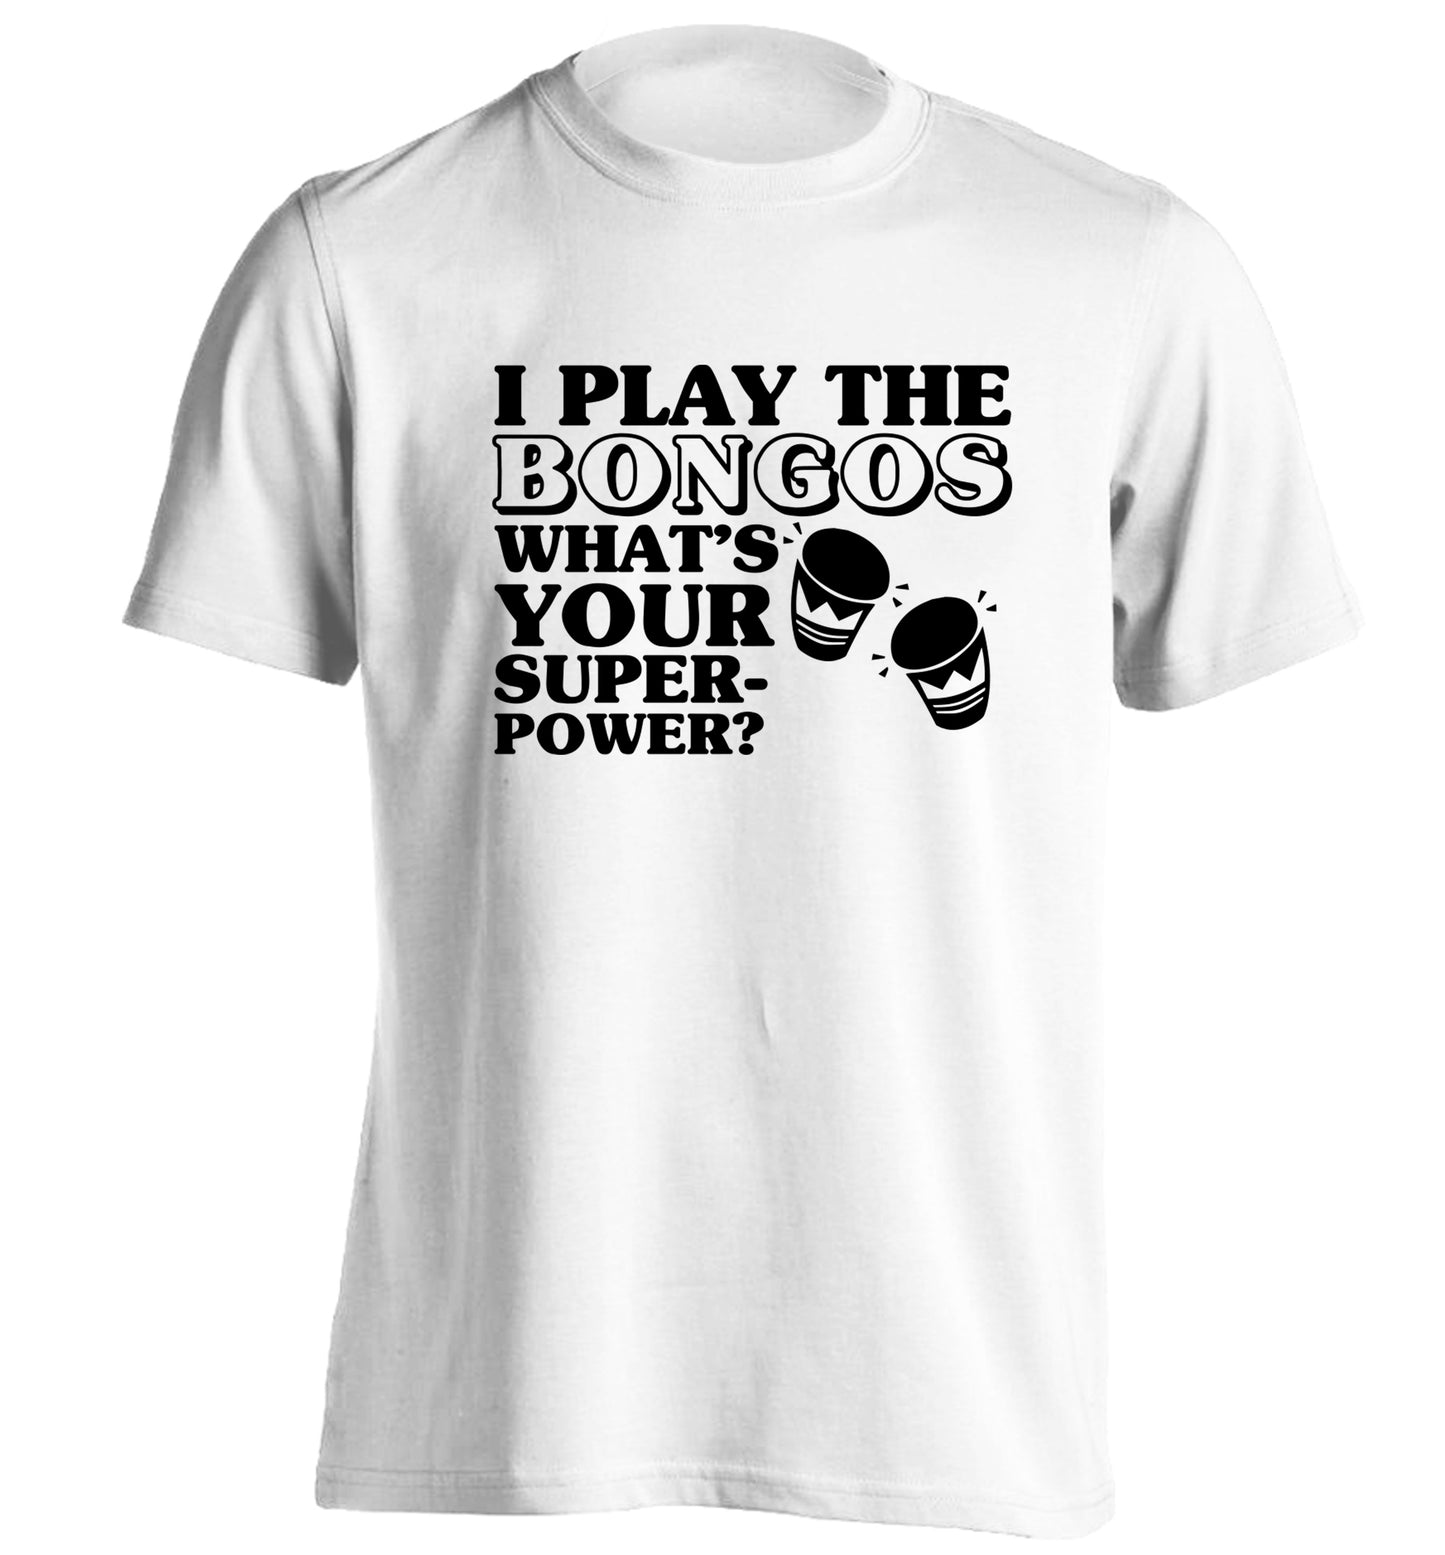 I play the bongos what's your superpower? adults unisexwhite Tshirt 2XL